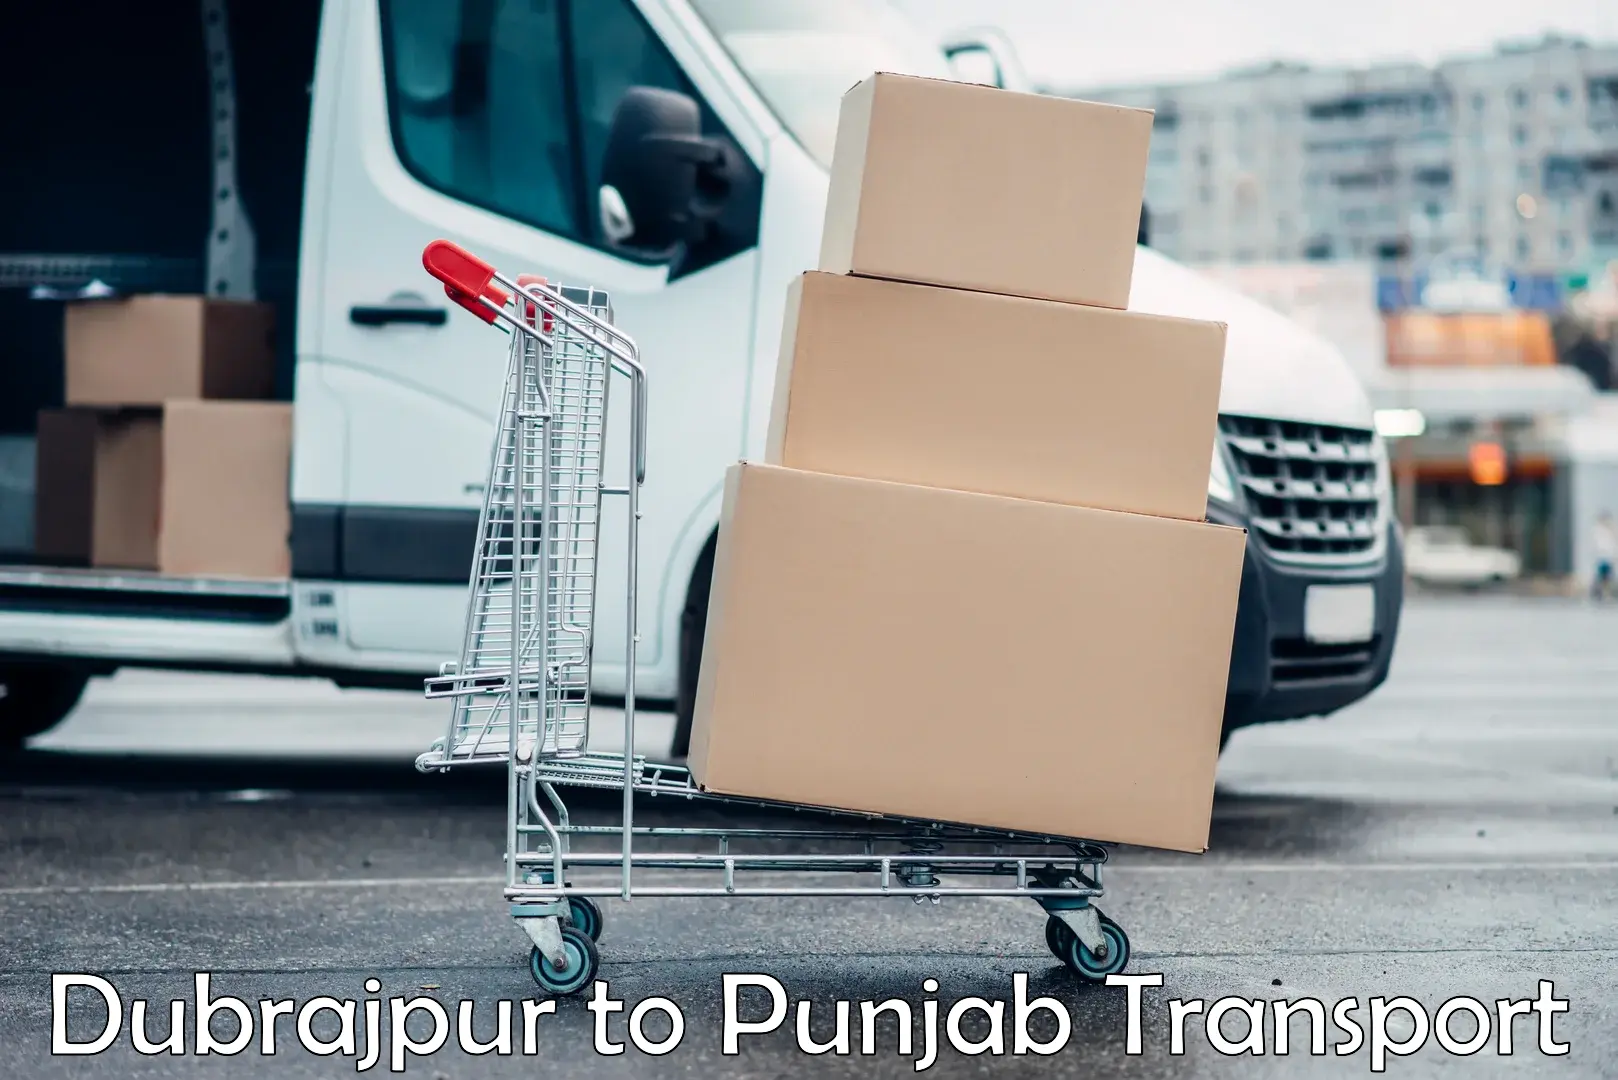 Goods delivery service Dubrajpur to Faridkot